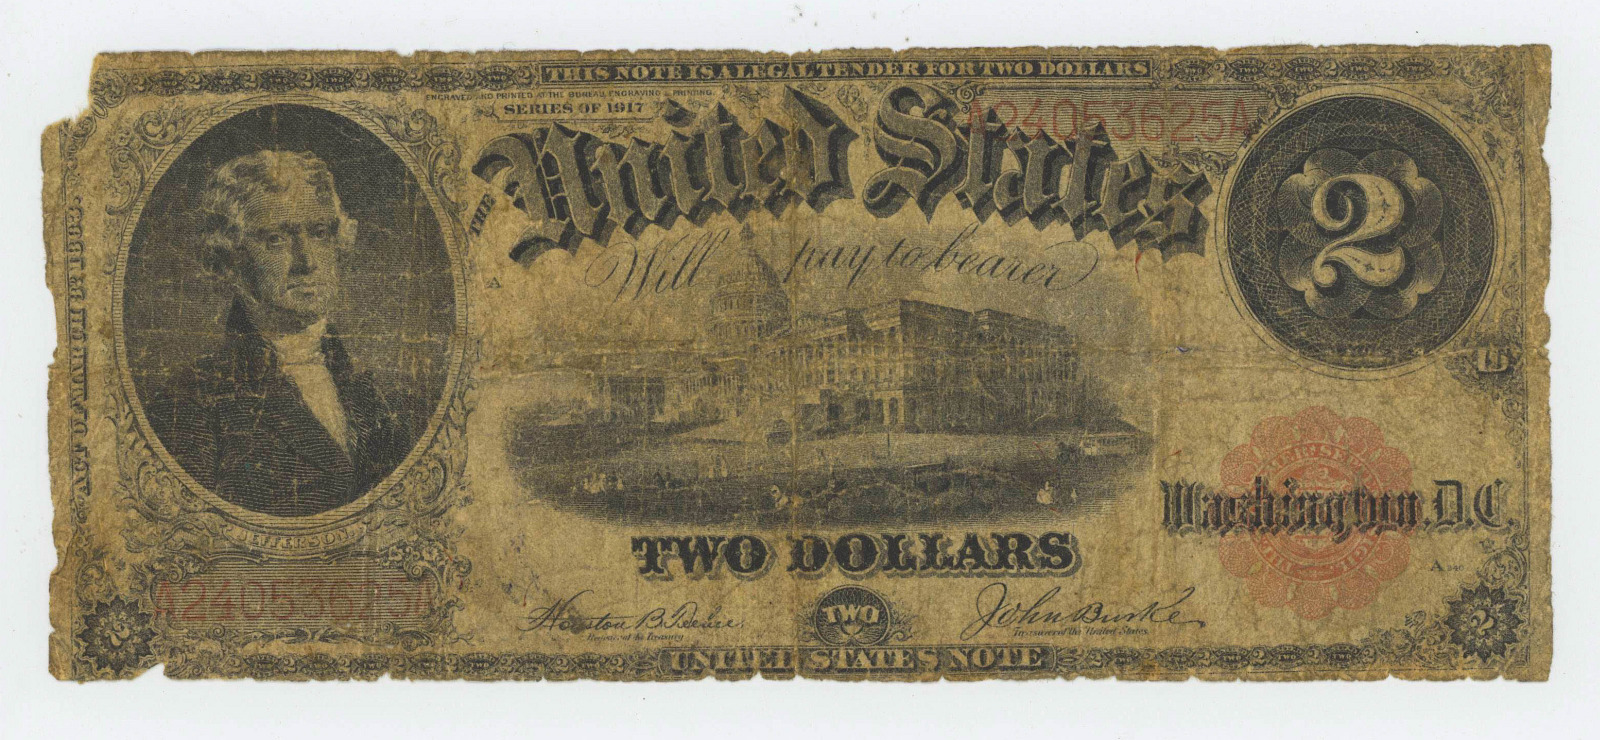 1917 TWO DOLLAR LEGAL TENDER NOTE